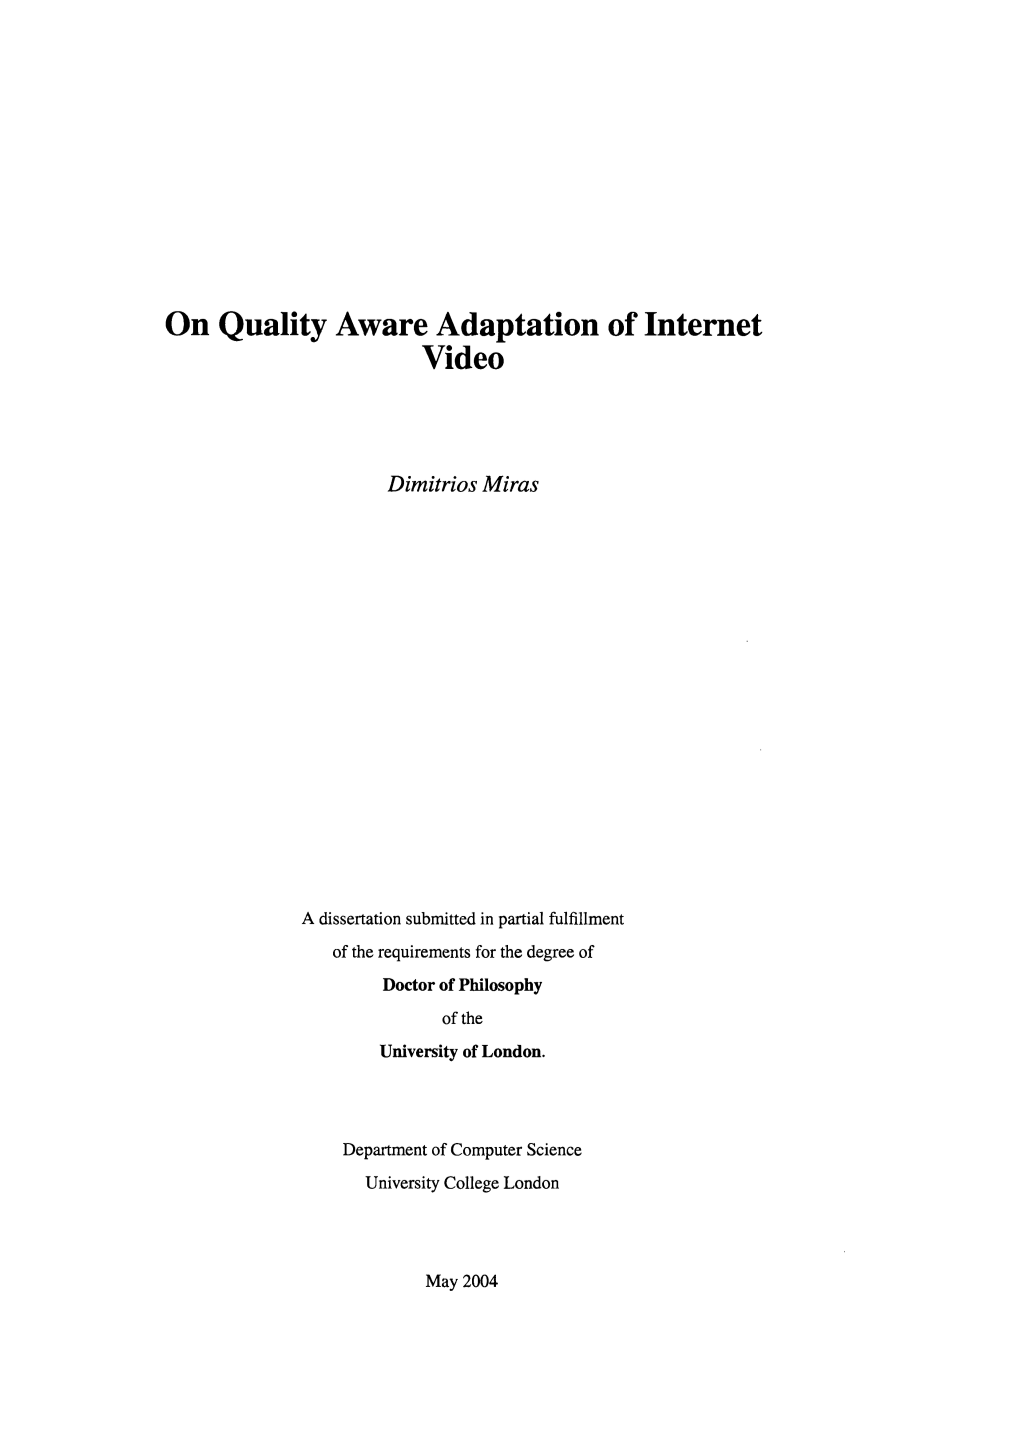 On Quality Aware Adaptation of Internet Video